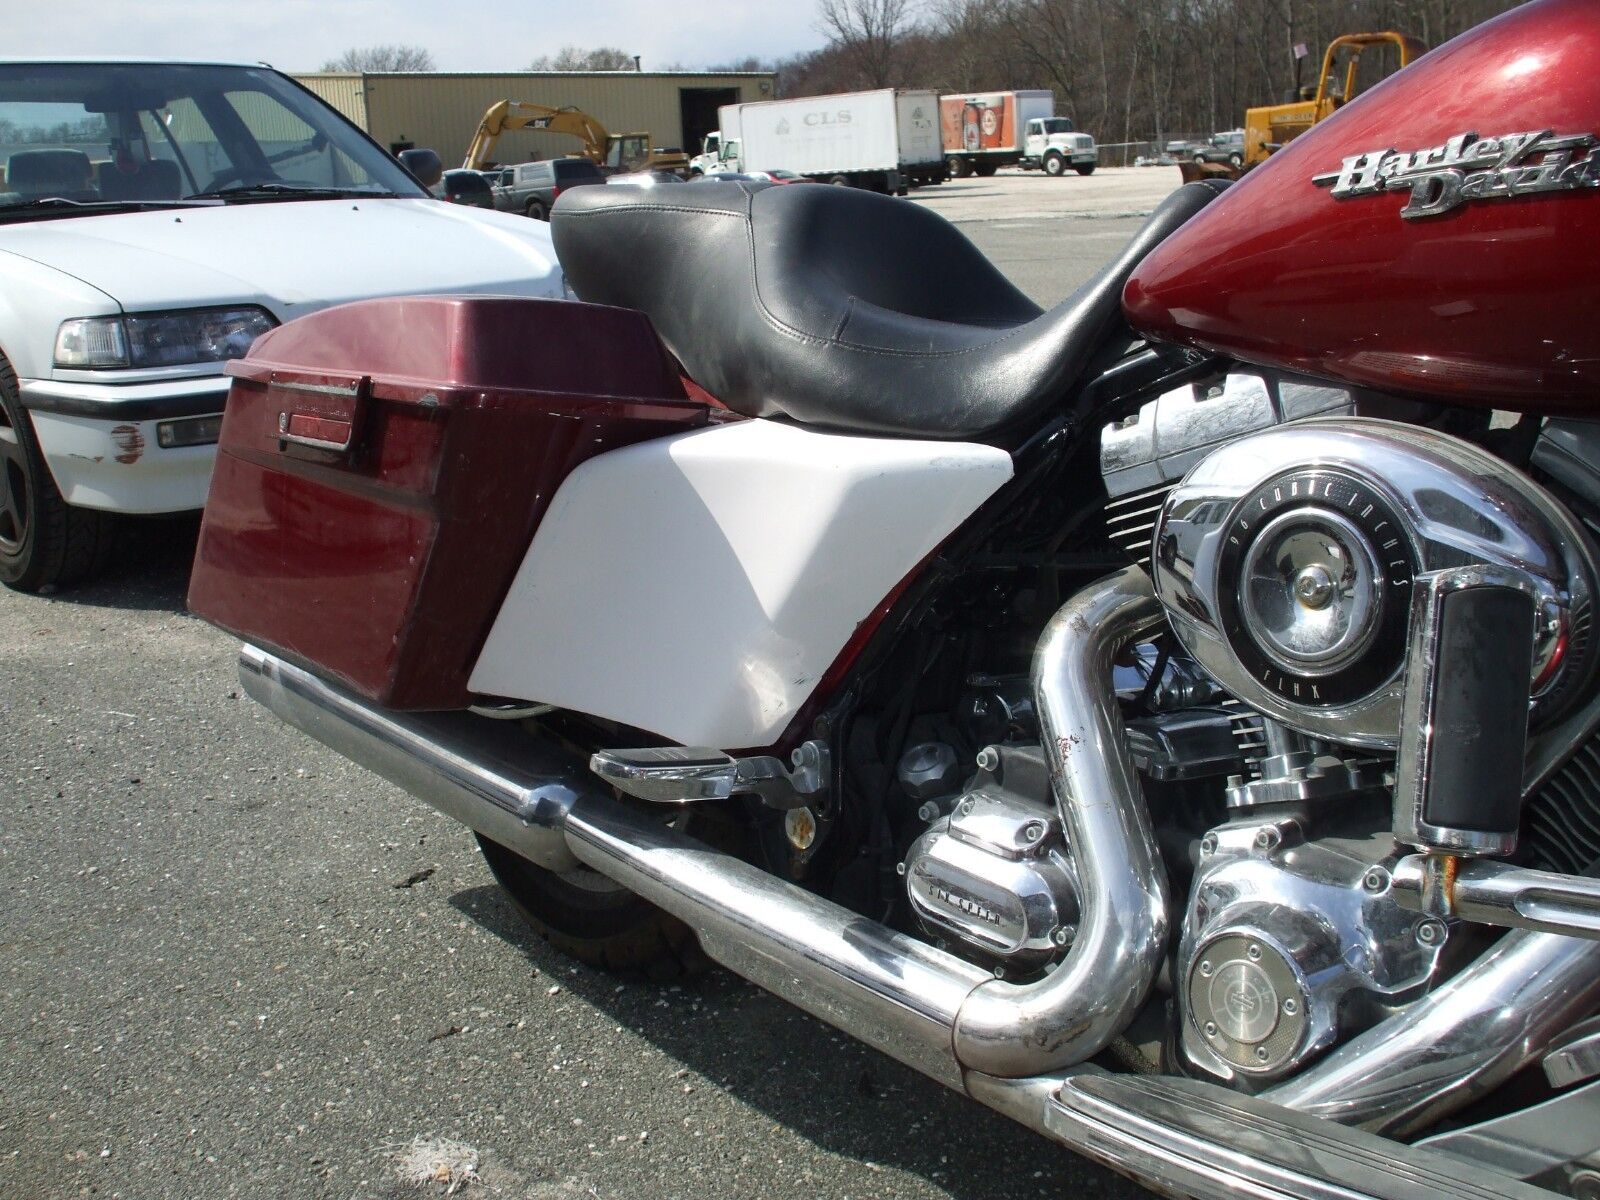 Bagger flaired side covers fits Harley Davidson